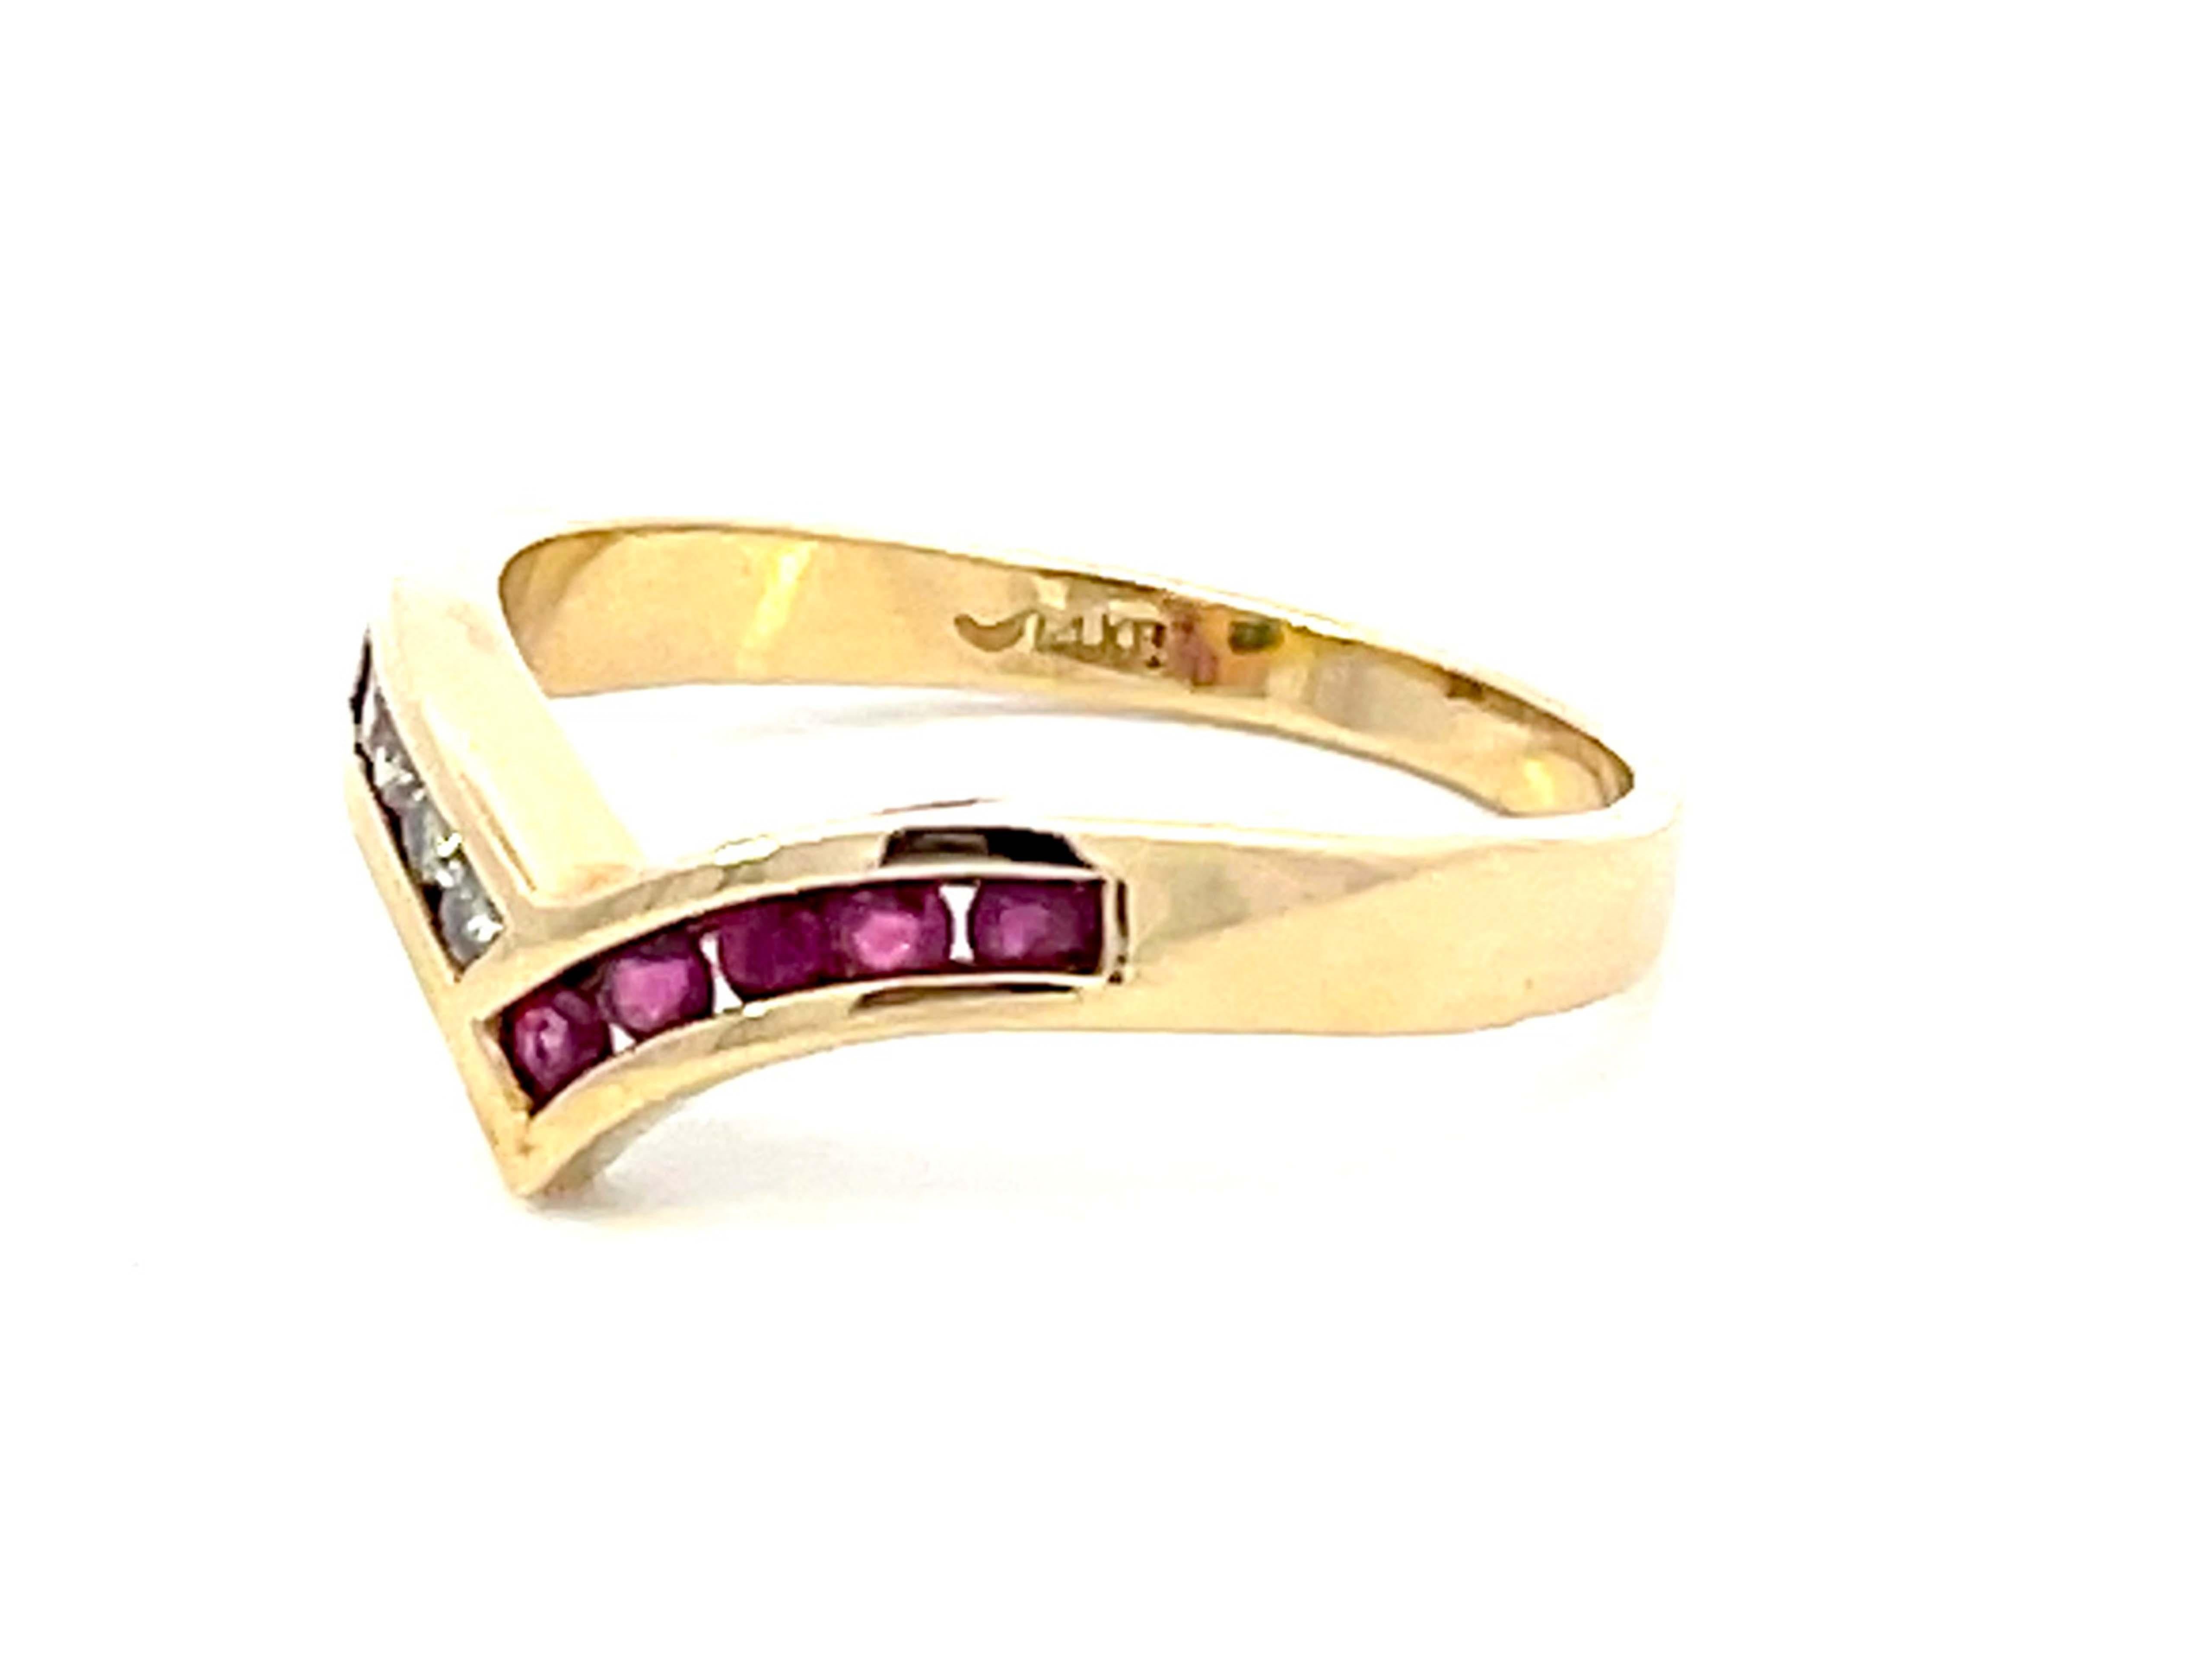 Brilliant Cut V Shaped Ruby Diamond Band Ring in 14k Yellow Gold For Sale